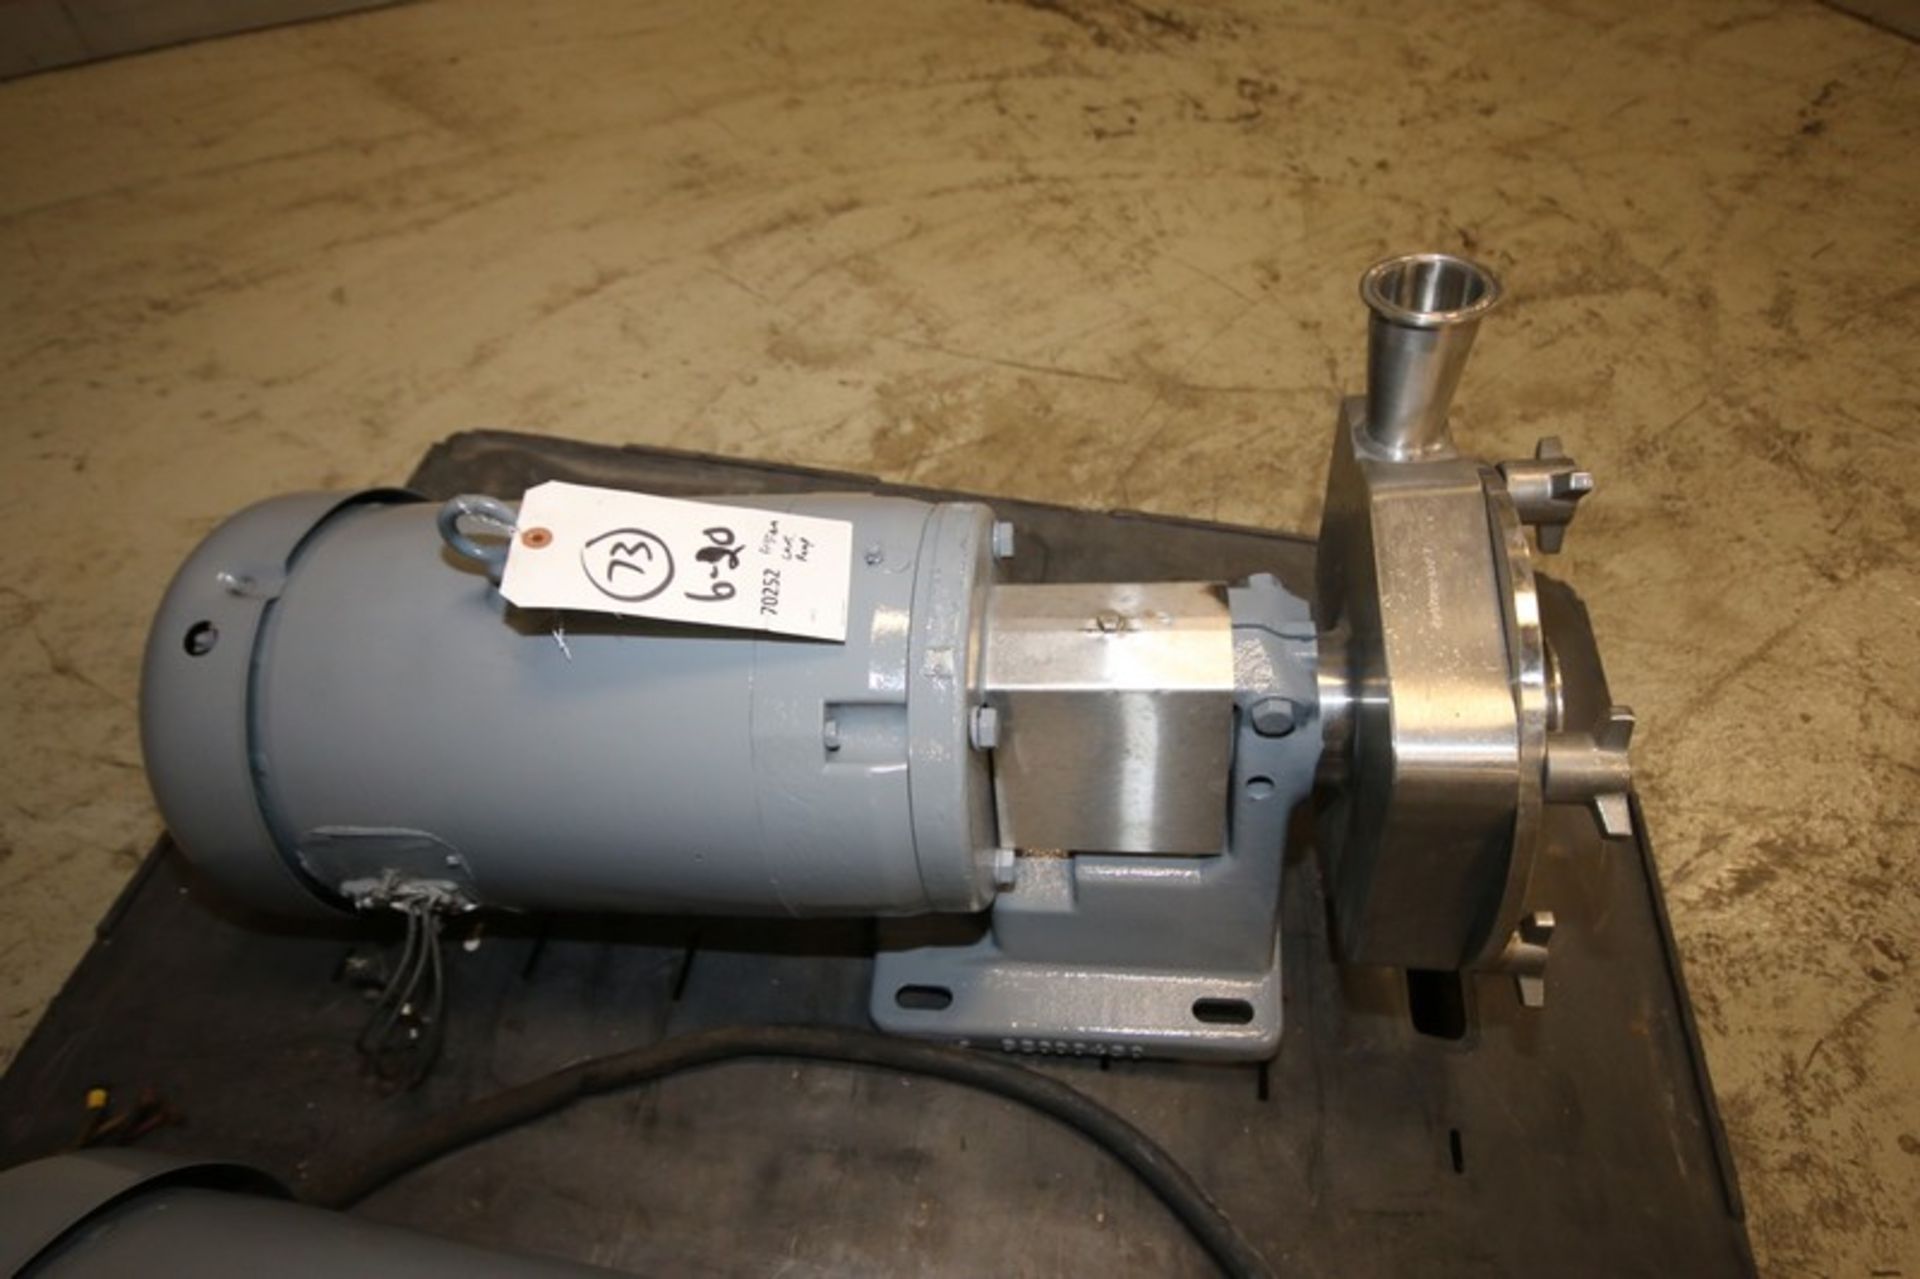 Fristam Aprox. 10 hp Centrifugal Pump, S/N FP17320203057, with Aprox. 2" x 3" Clamp Type Inlet/ - Image 3 of 3